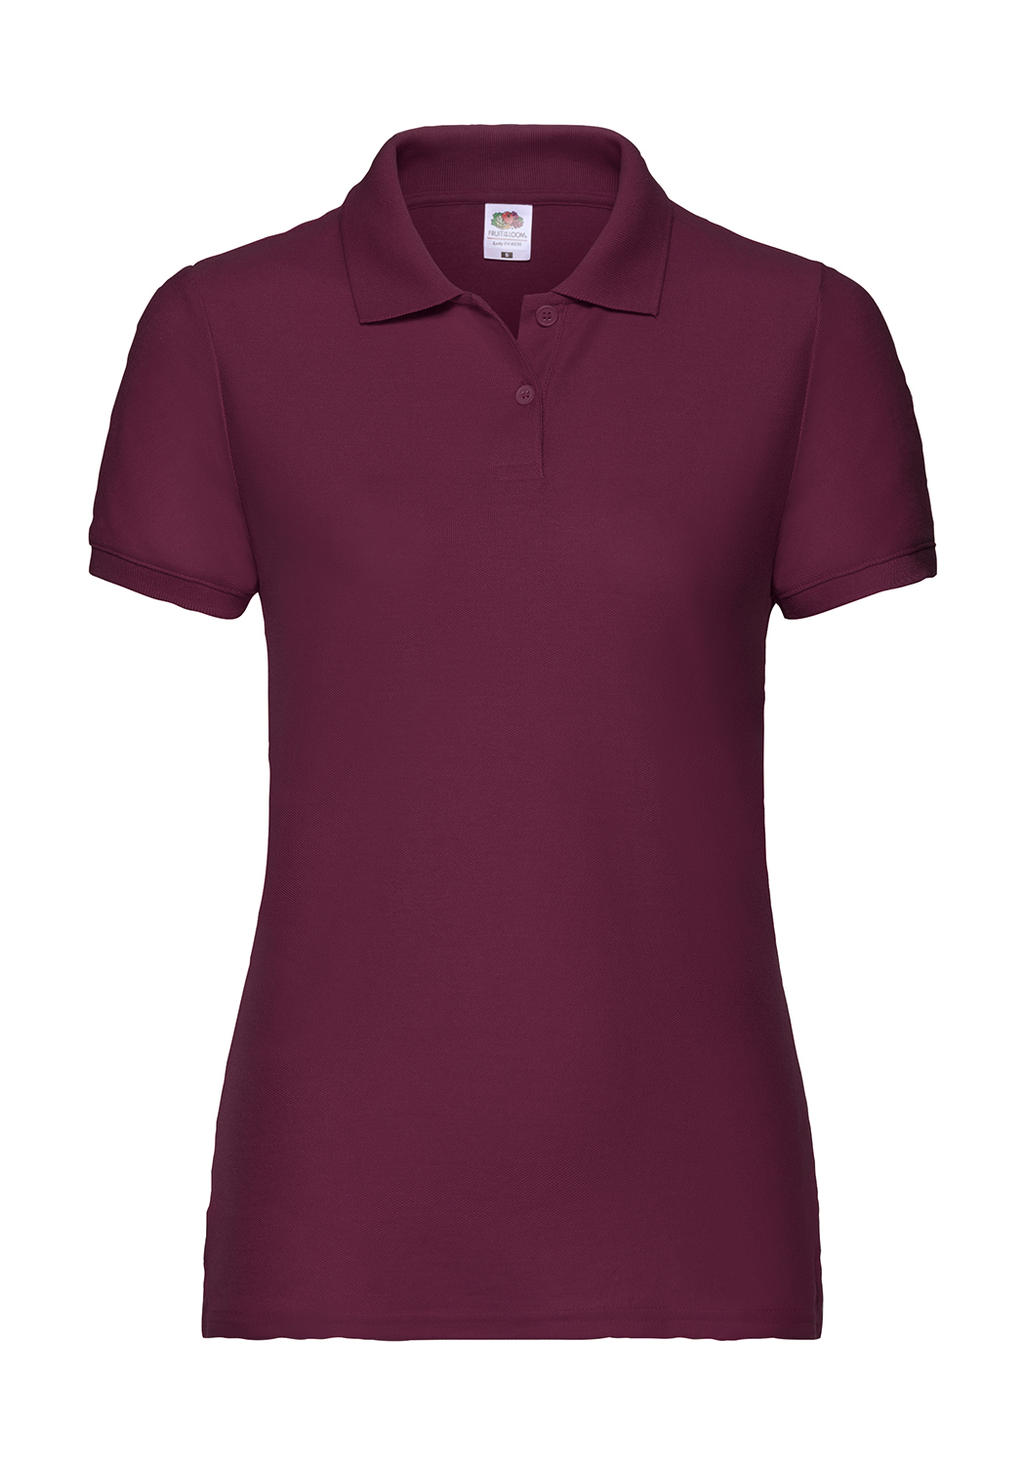  Ladies 65/35 Polo in Farbe Burgundy